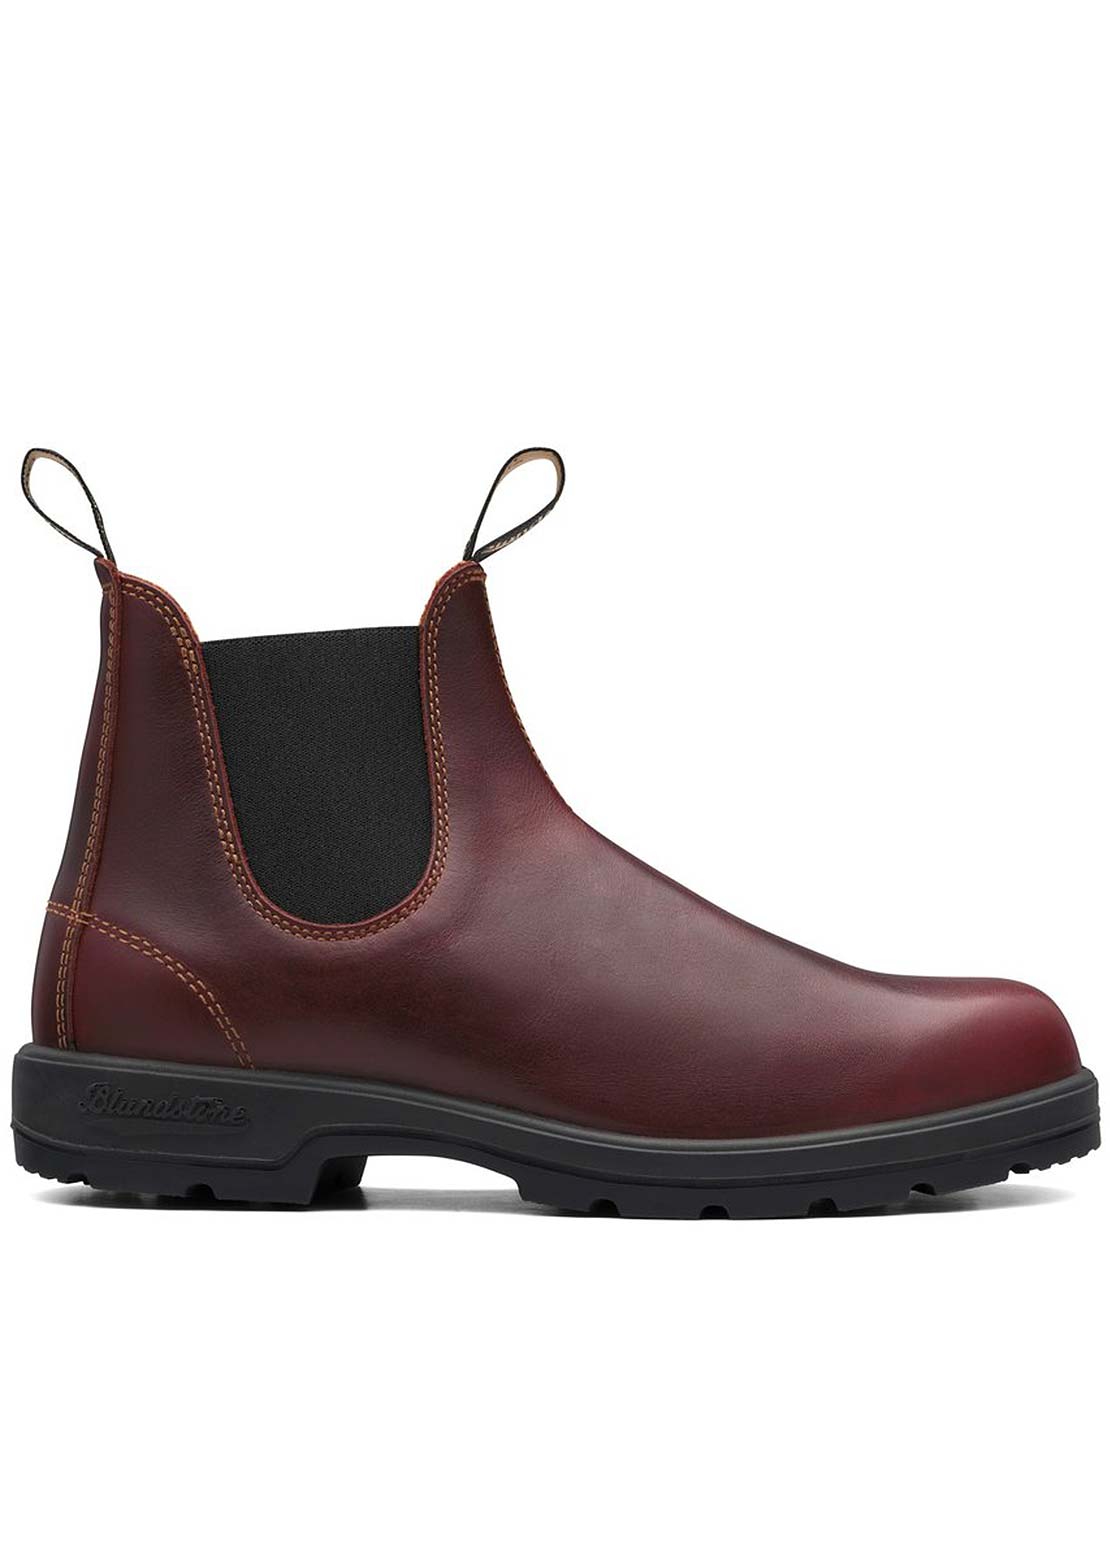 Blundstone 1440 Classic Boots Redwood